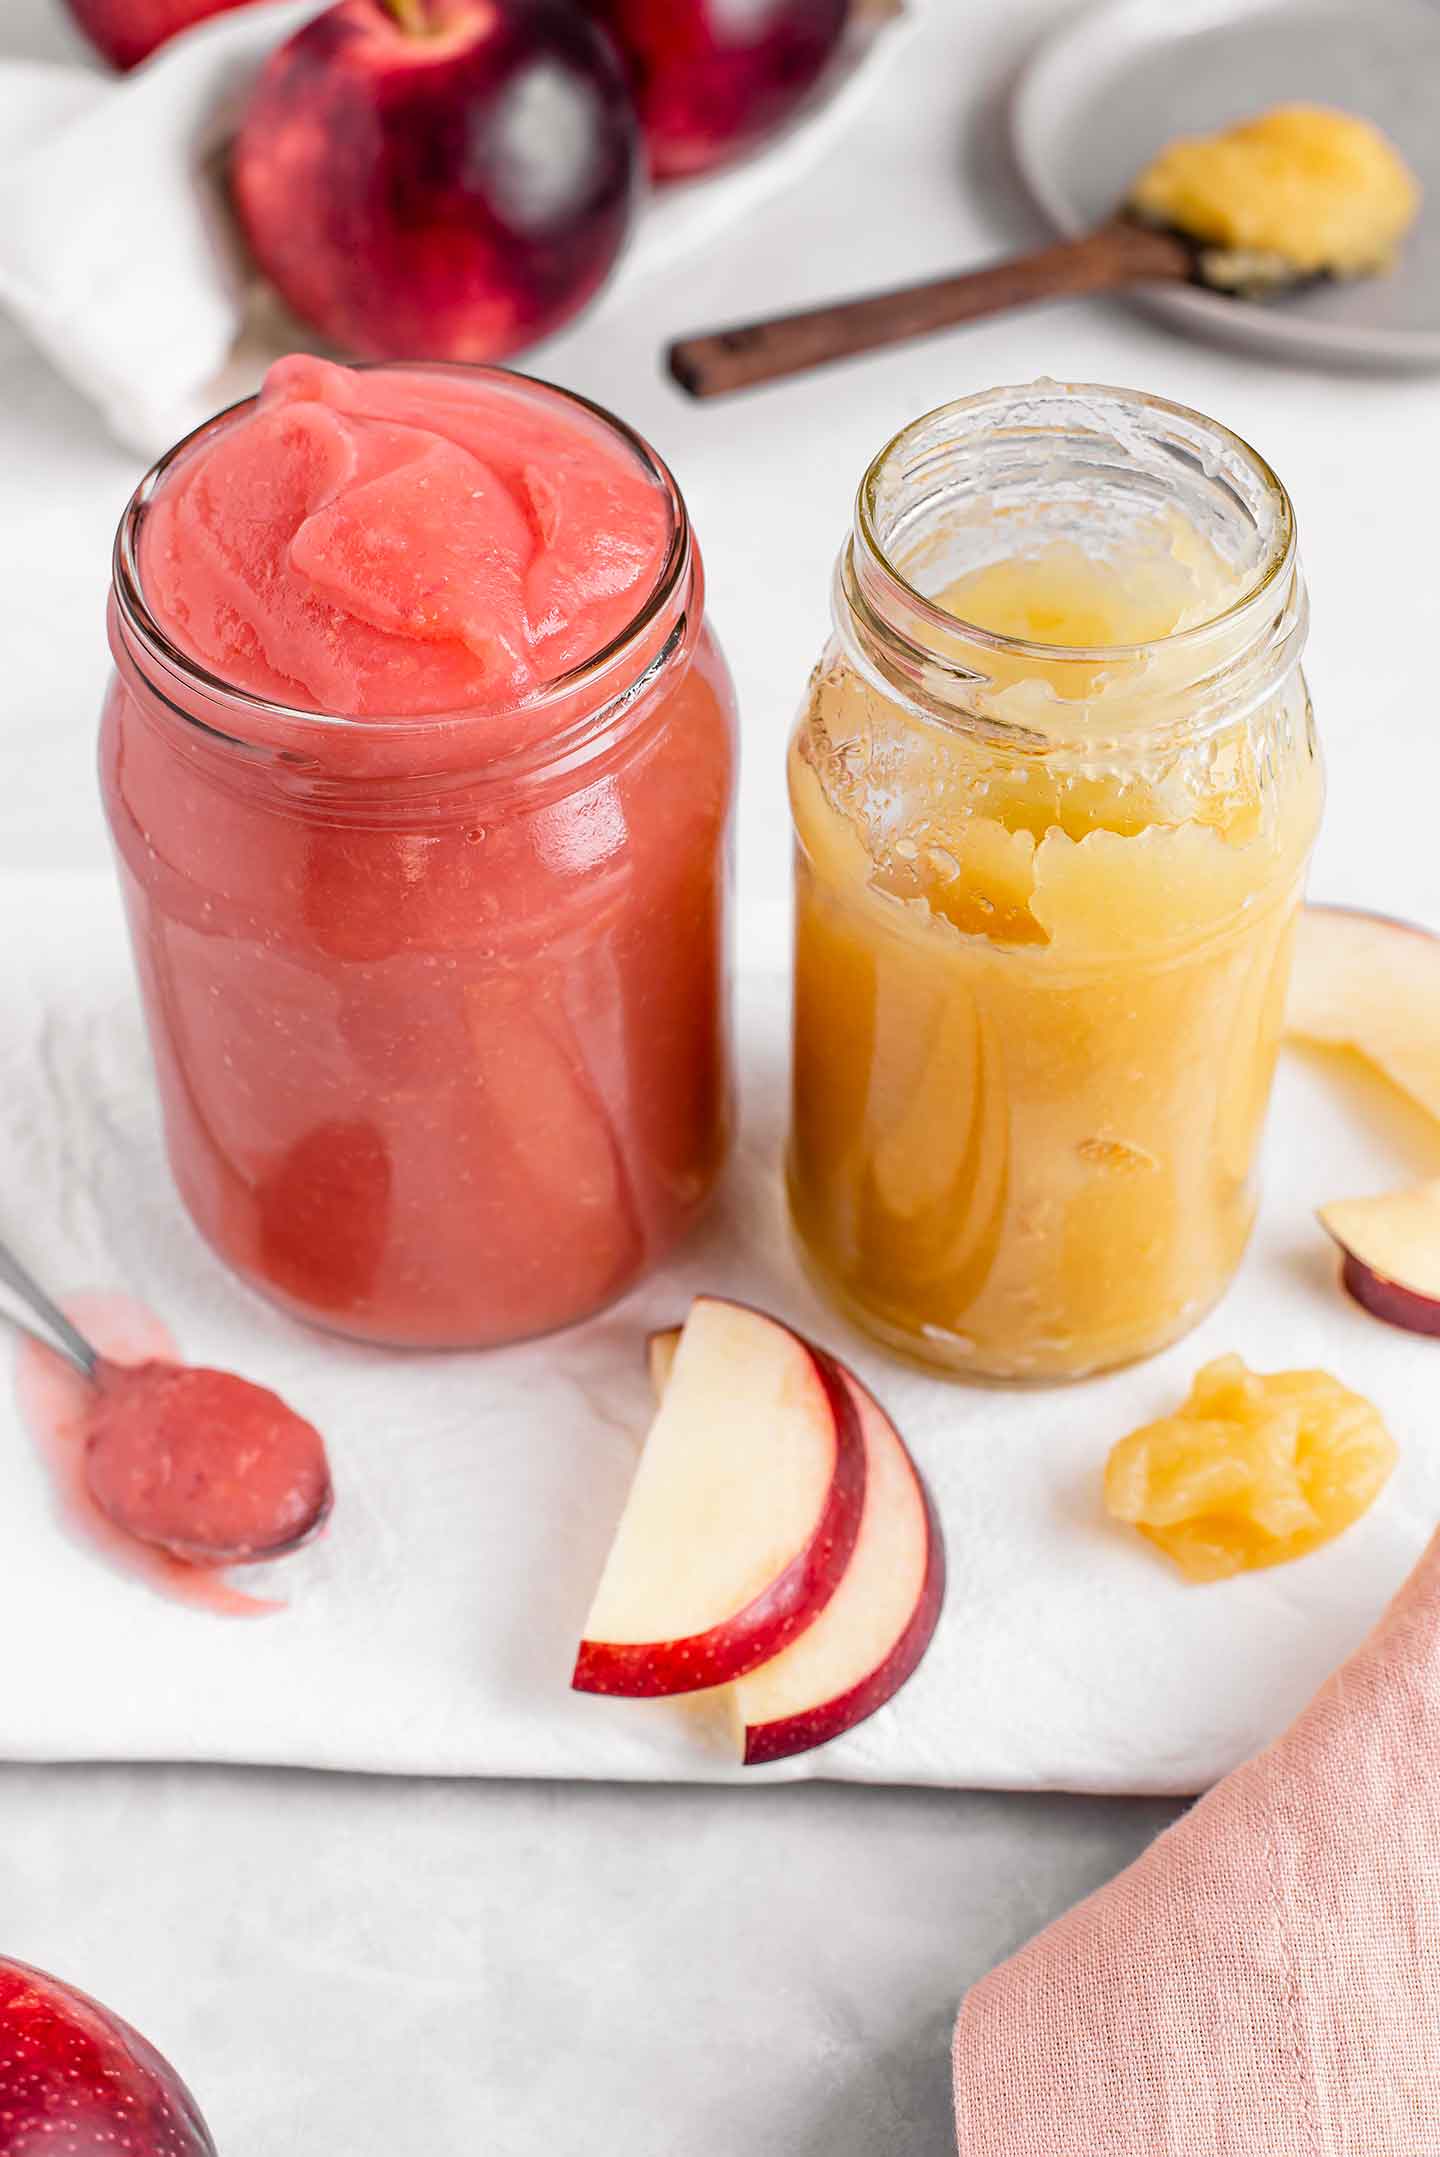 Side view of two glass jars with homemade applesauce. One is bright pink, the other is a golden coloured sauce.